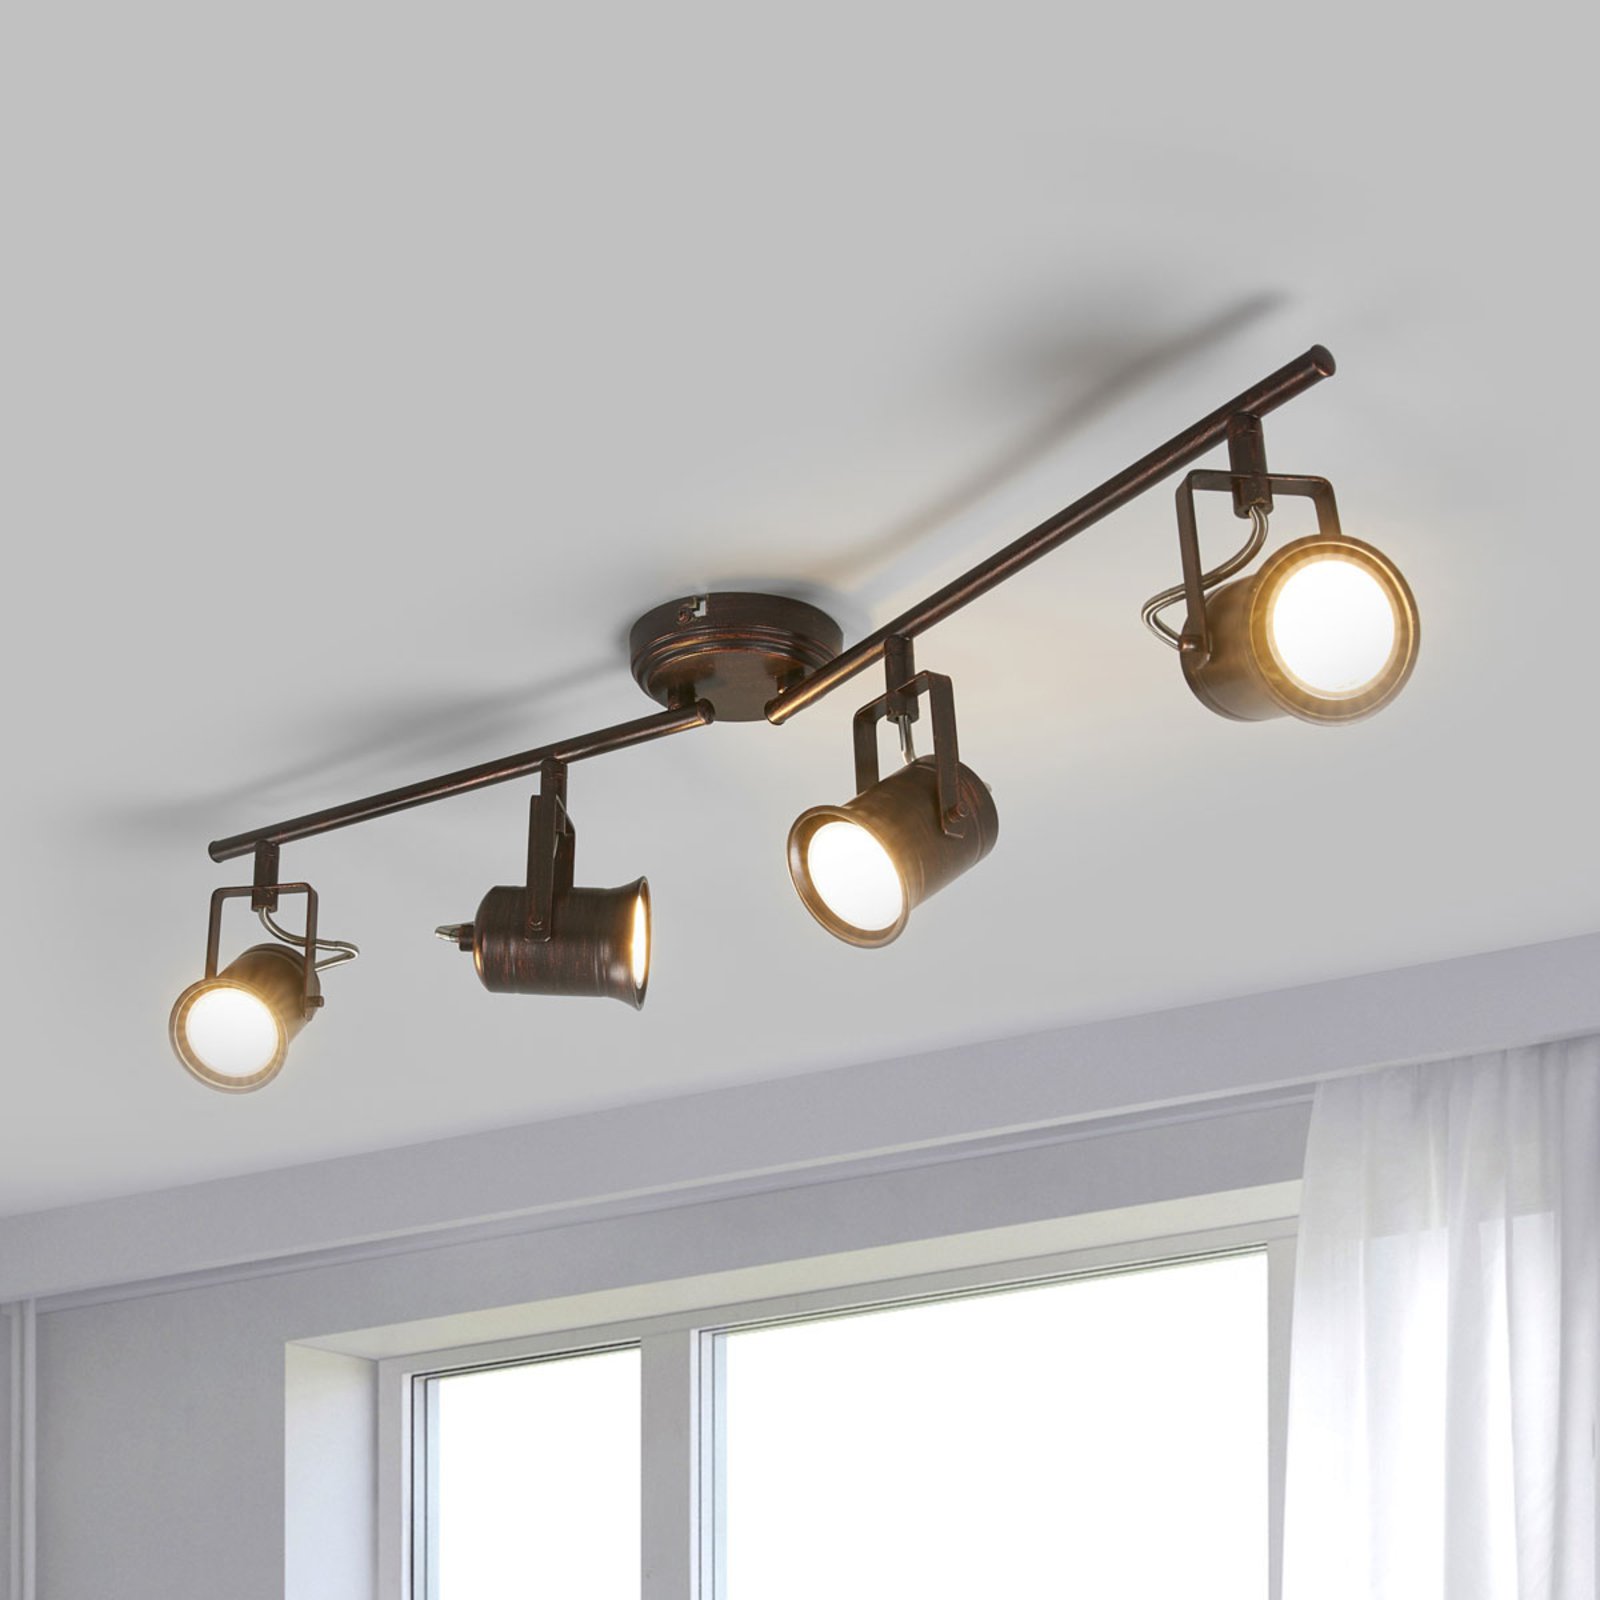 Four-bulb ceiling light, rustic style